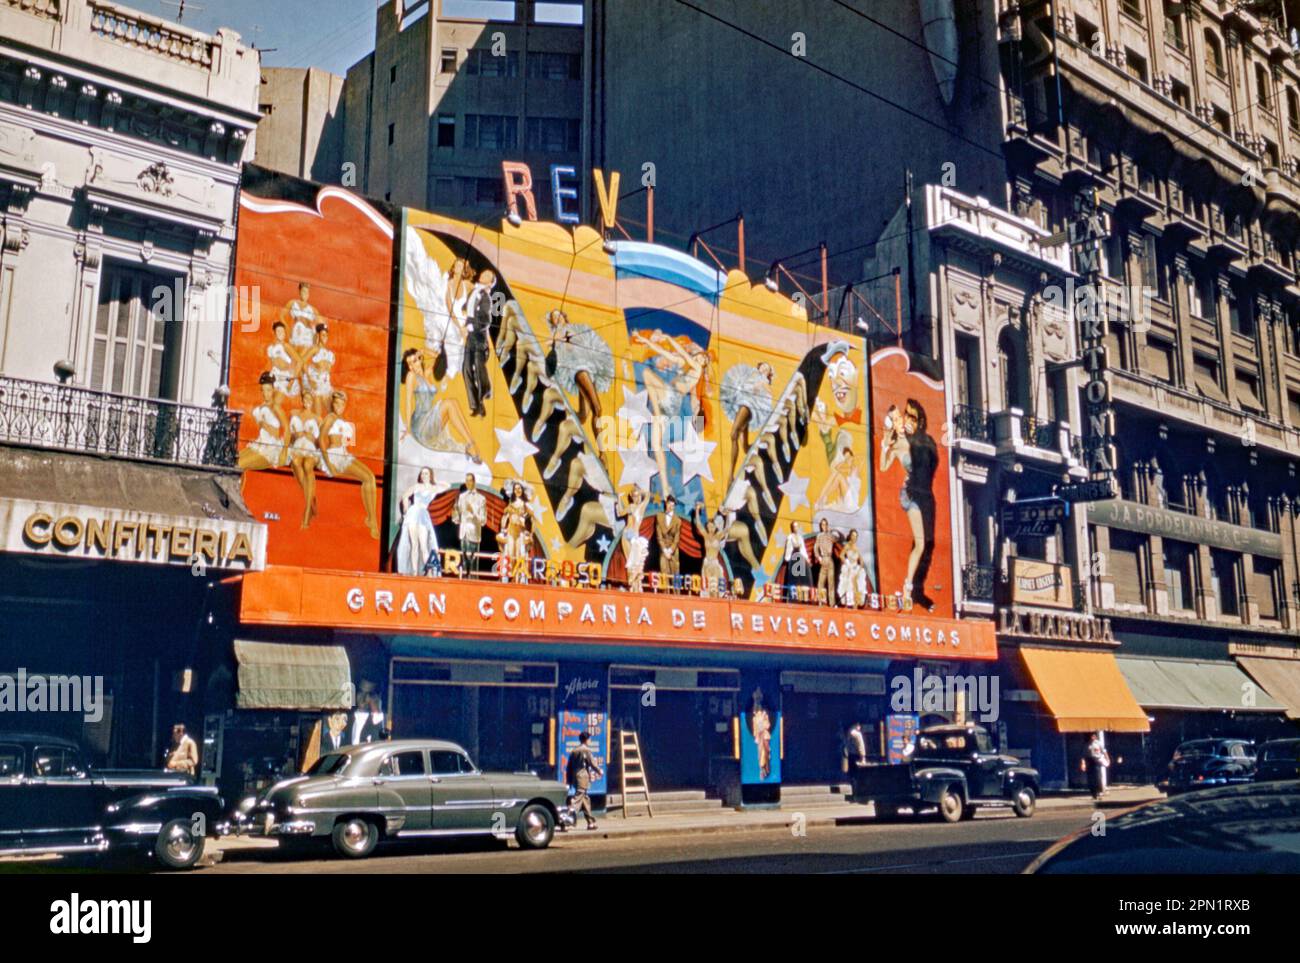 A theatre in downtown Buenos Aires, Argentina, South America putting on a live ‘review’ performance c. 1955. Advertised on a giant colourful hoarding or billboard above the entrance was a variety show by the ‘Gran Compania de Revistas Comicas’ (‘Great Comic Magazine Company’) with ‘leggy’ dancers prominently featured. Star billing went to Ary Barroso (1903–1964), the well-known Brazilian composer and pianist. He was one of the country’s most successful songwriters in the first half of the 20th century, composing many songs for artists like Carmen Miranda – a vintage 1950s photograph. Stock Photo